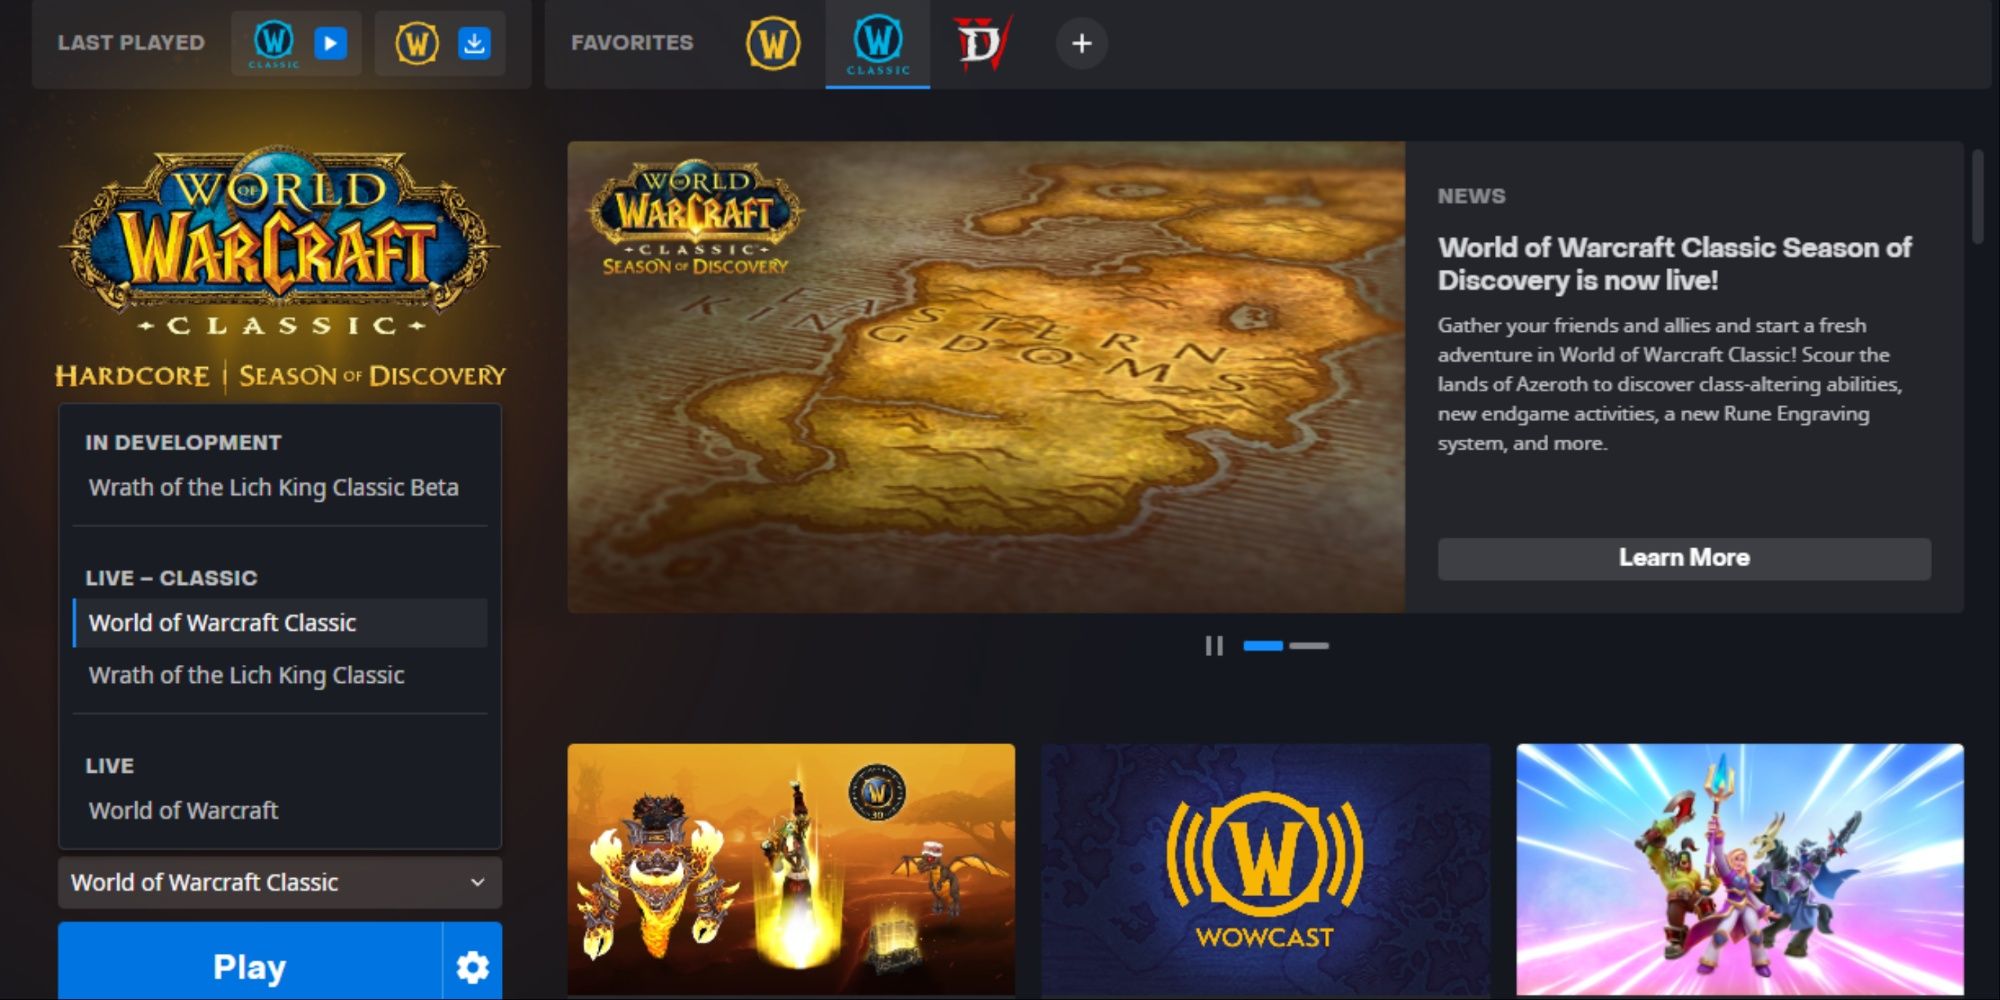 The World of Warcraft Classic launcher screen, including advertisements and promo art for Blizzard games and merch.